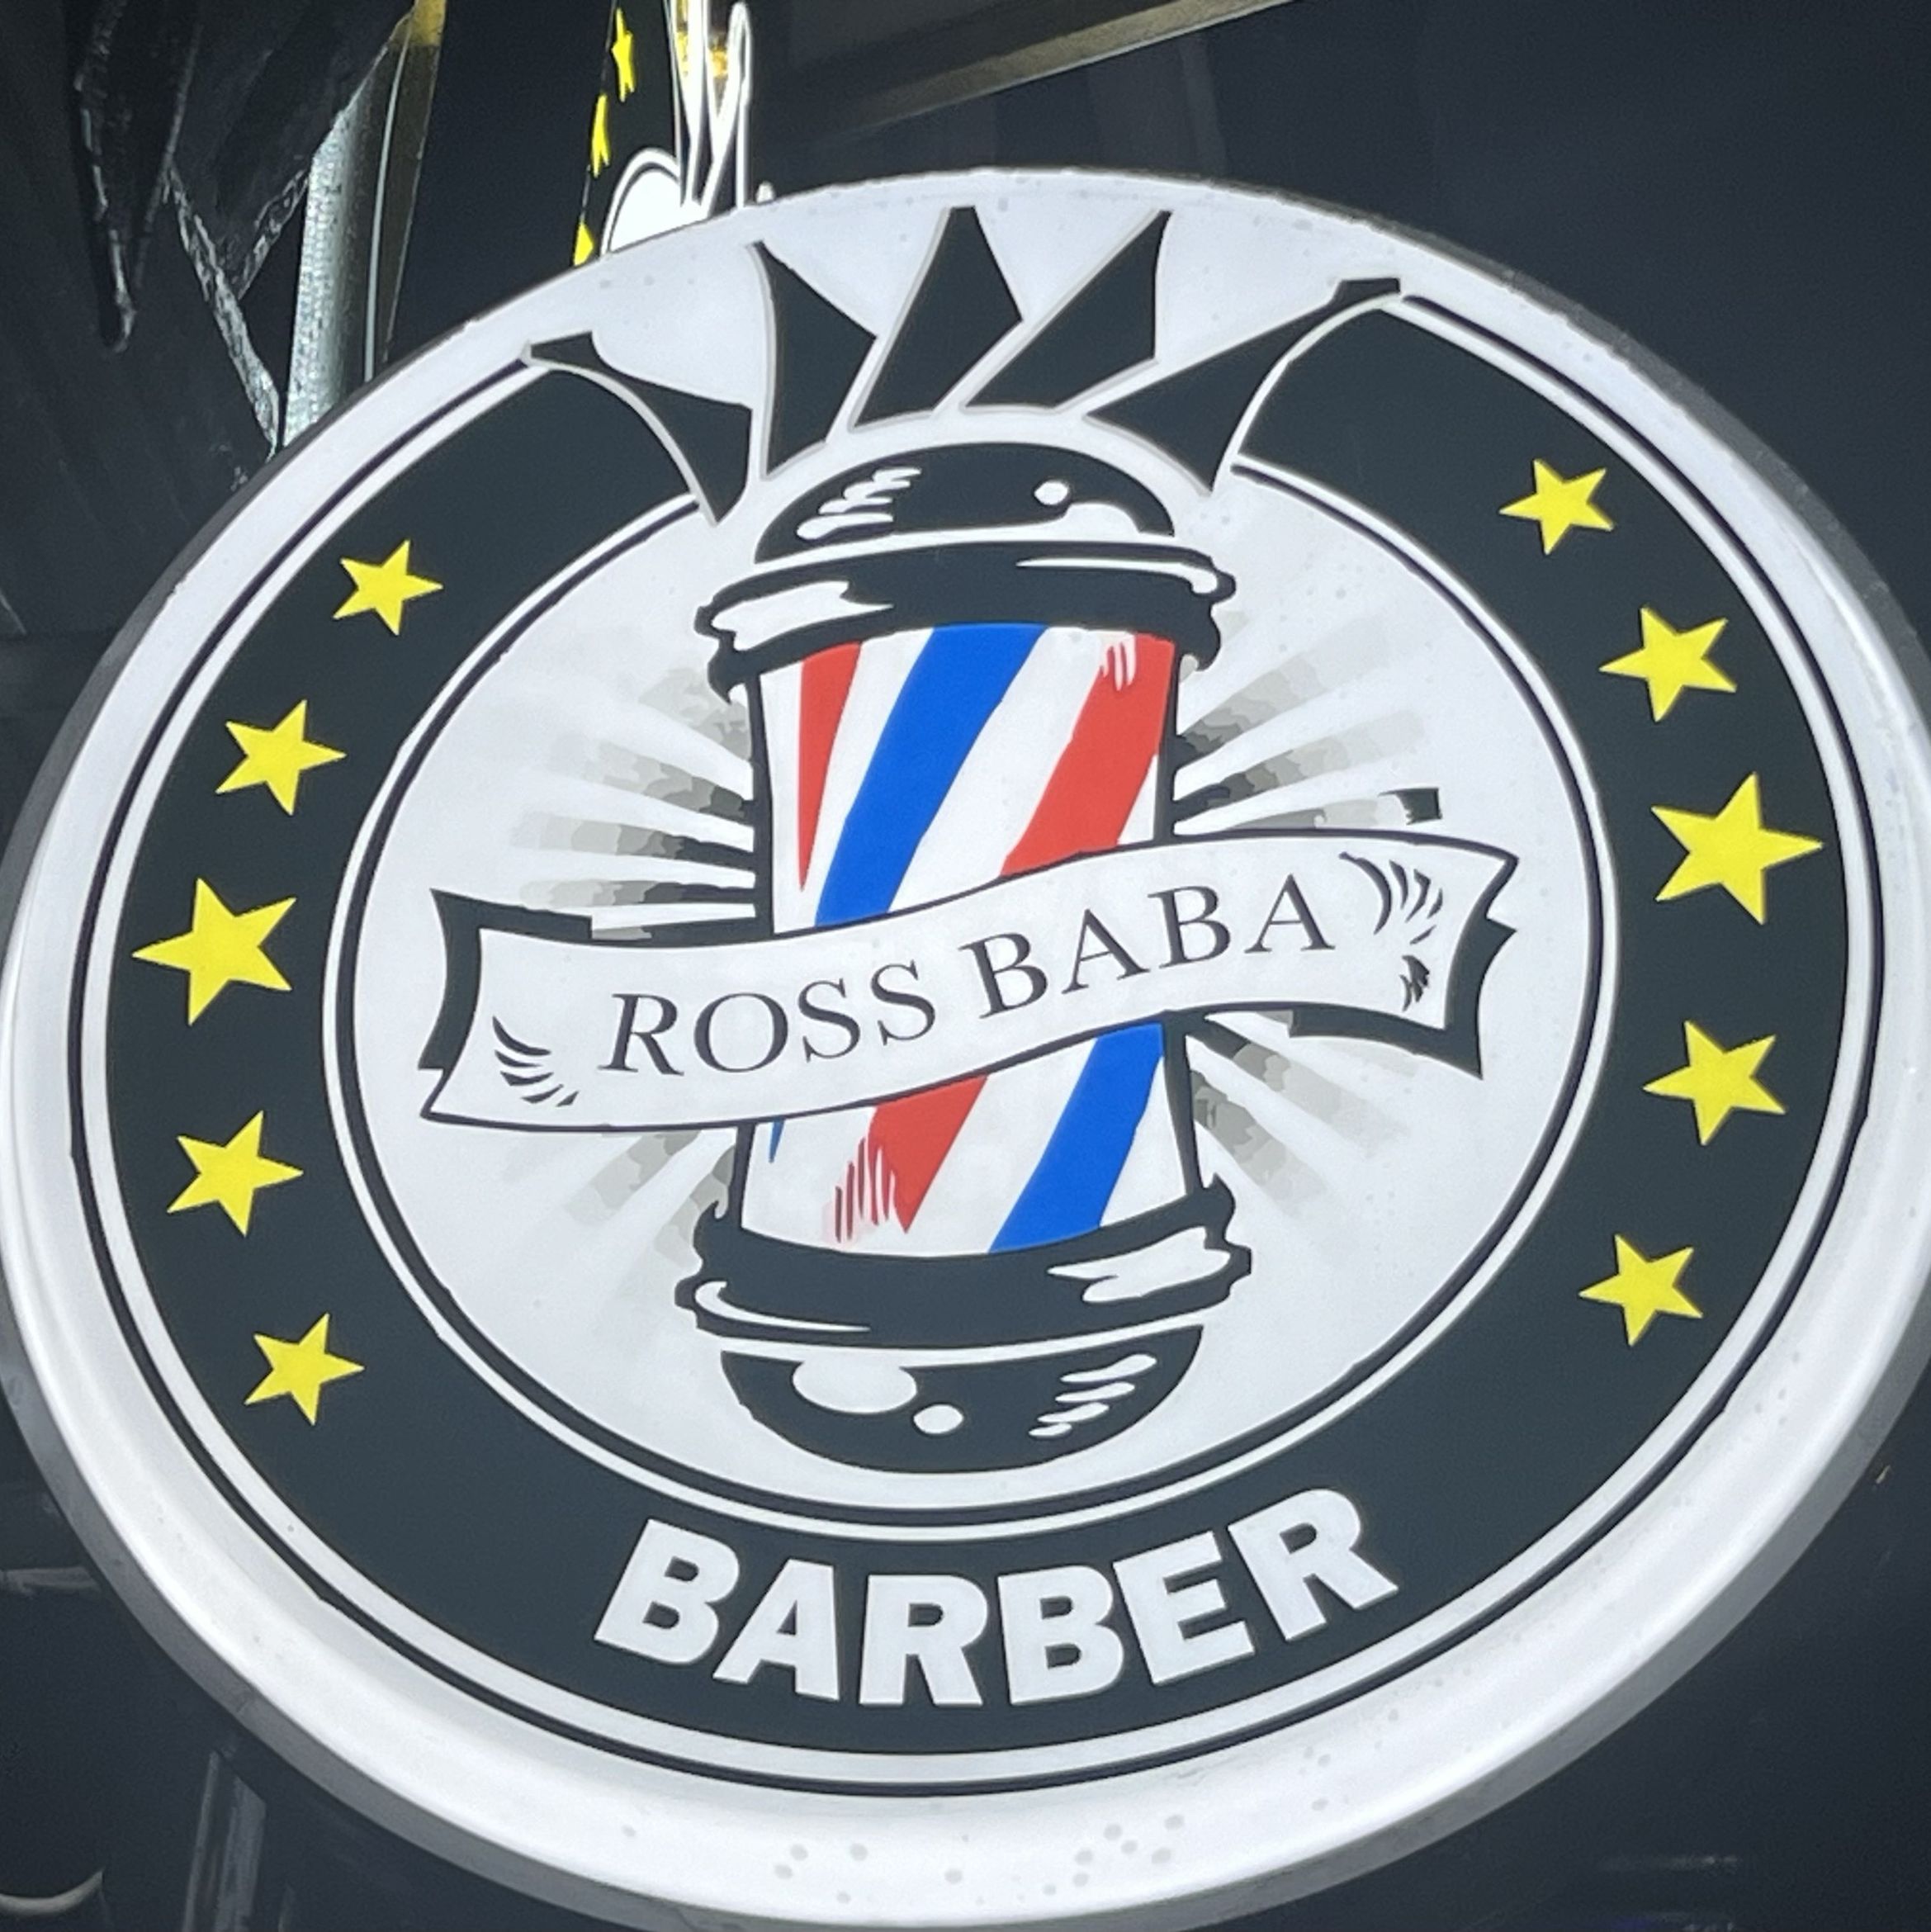 BARBER ROSS BABA, 758 Finchley Road, Temple fortune, NW11 7TH, London, London